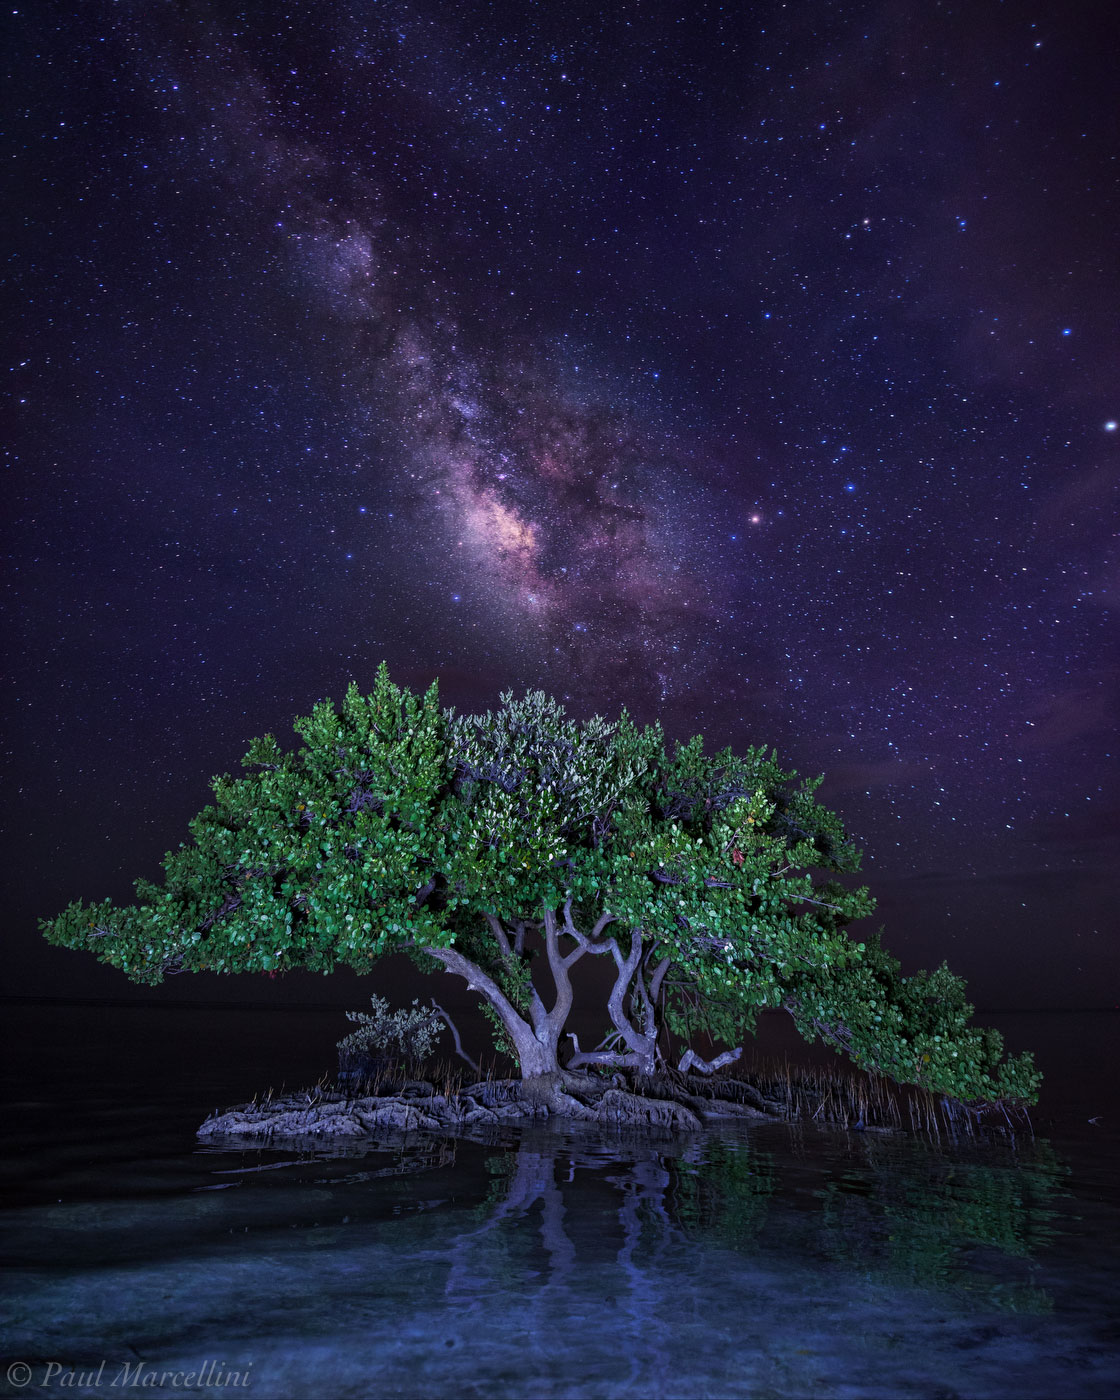 The Milky Way rises over a group of mangroves in the Florida Keys where the dark skies are not as disrupted with light pollution...